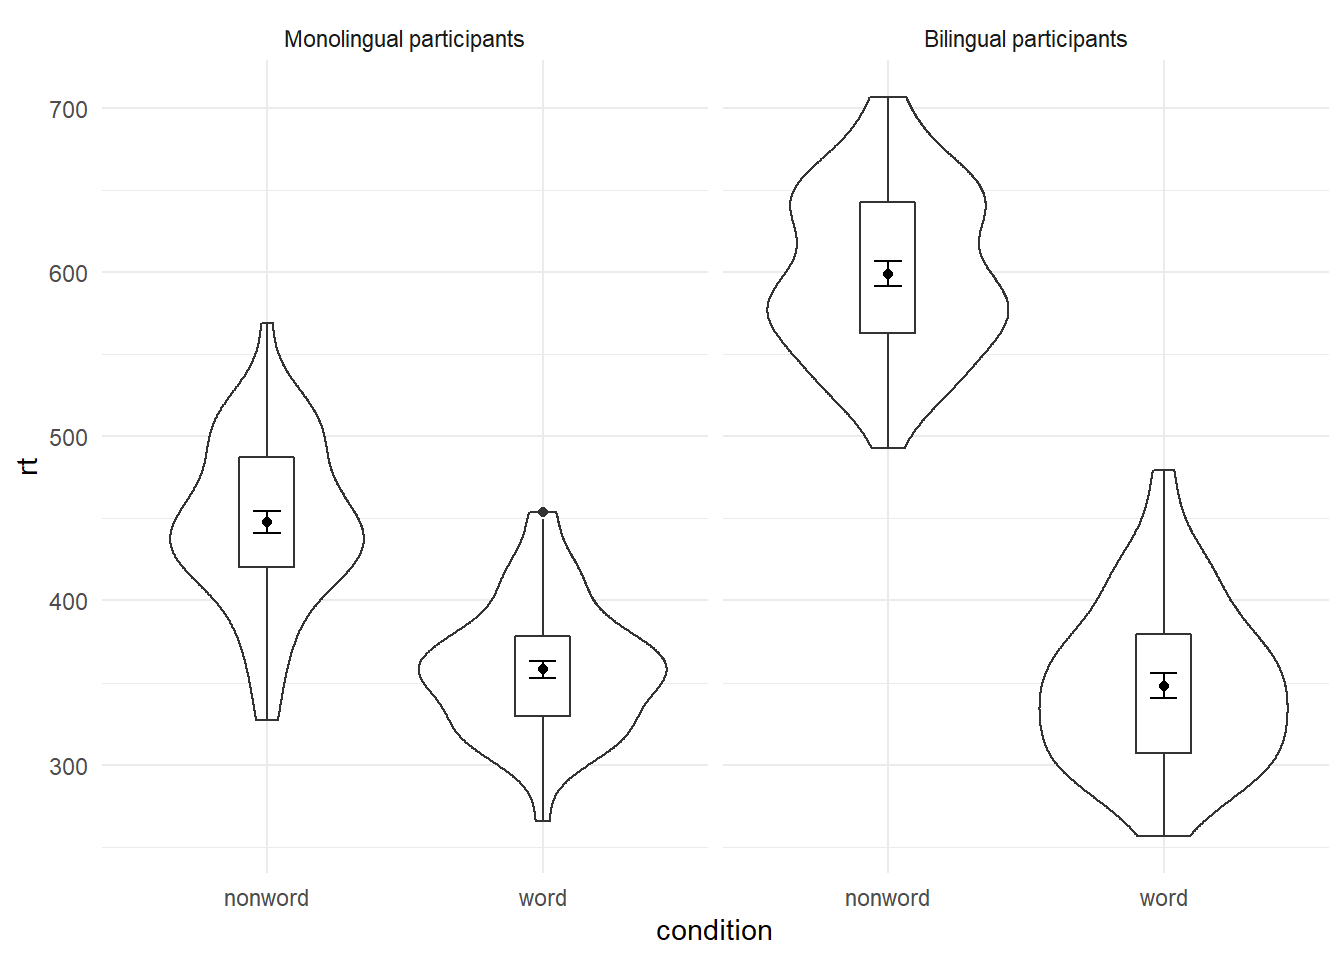 Faceted violin-boxplot with updated labels